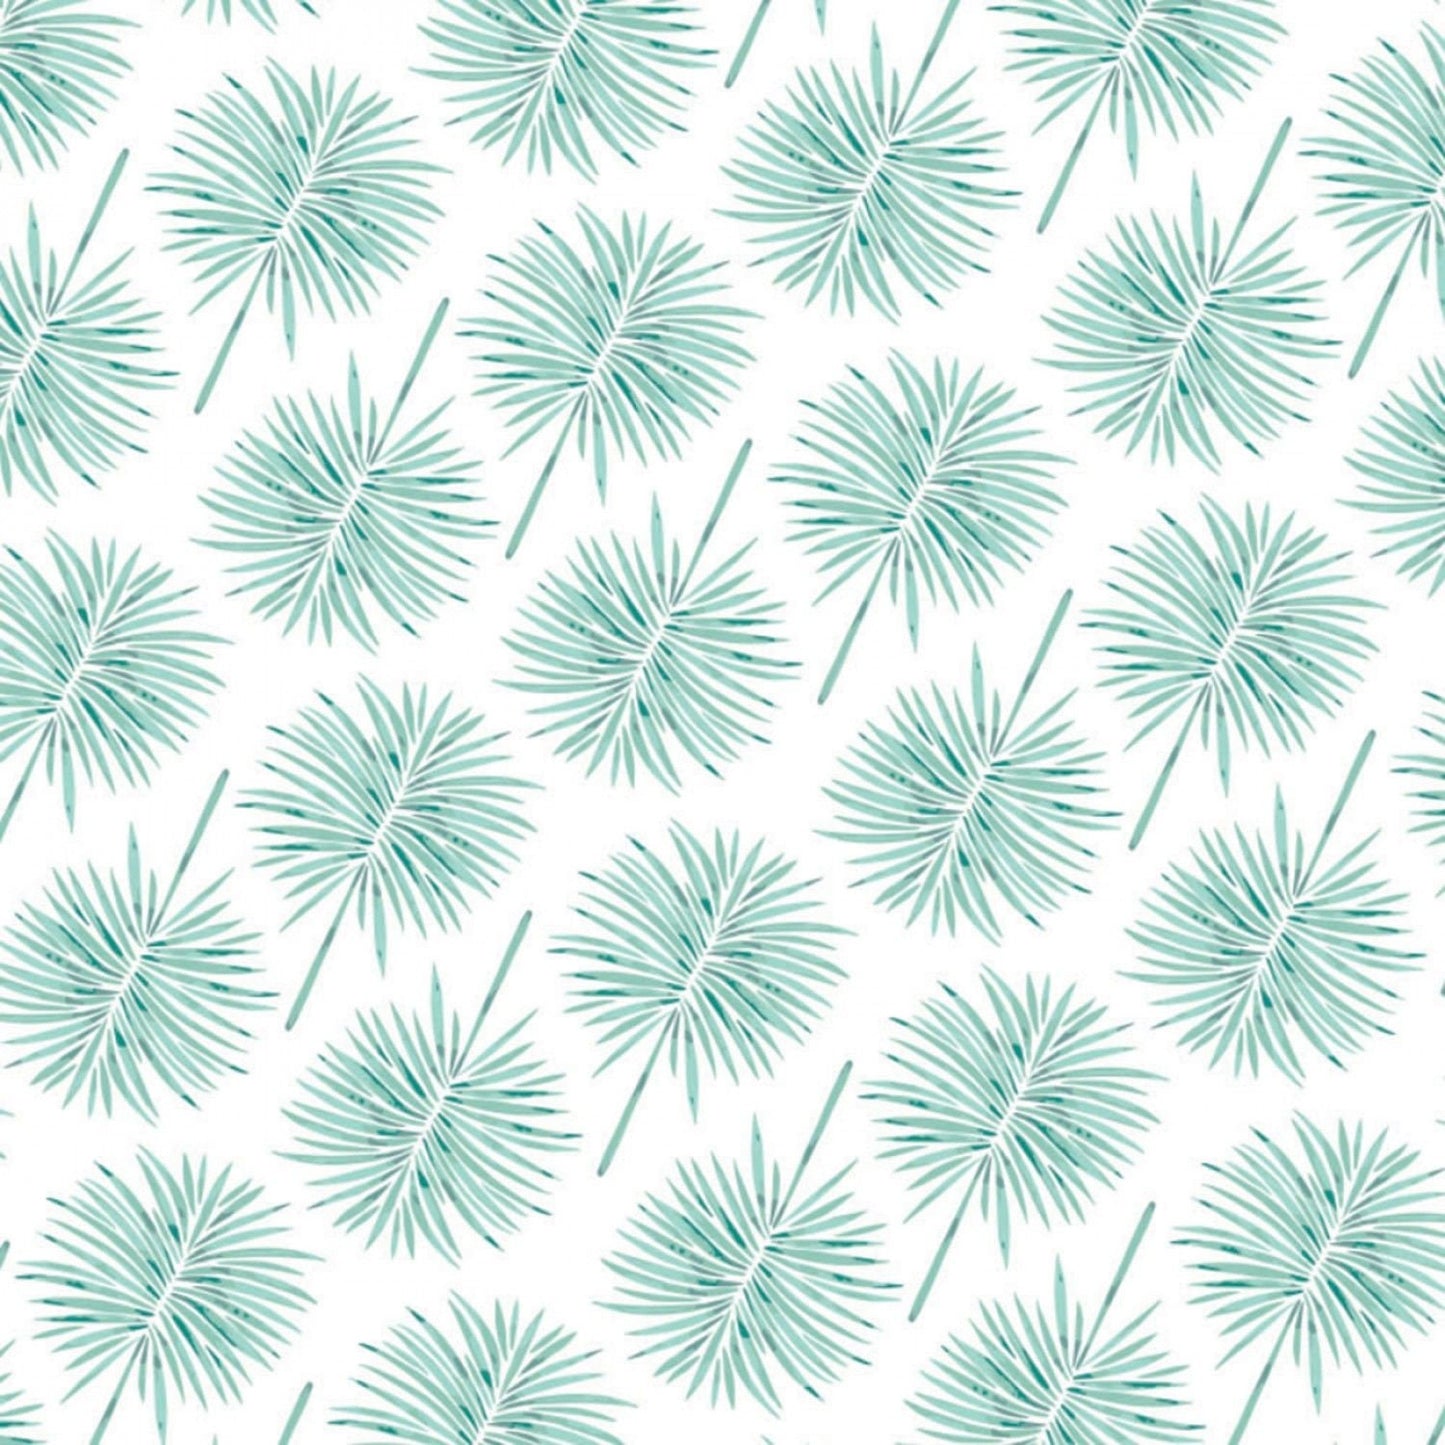 Moroccan Nights by Cat Coquillette Fan Palms Aqua 86190207-3 Digitally Printed Cotton Woven Fabric